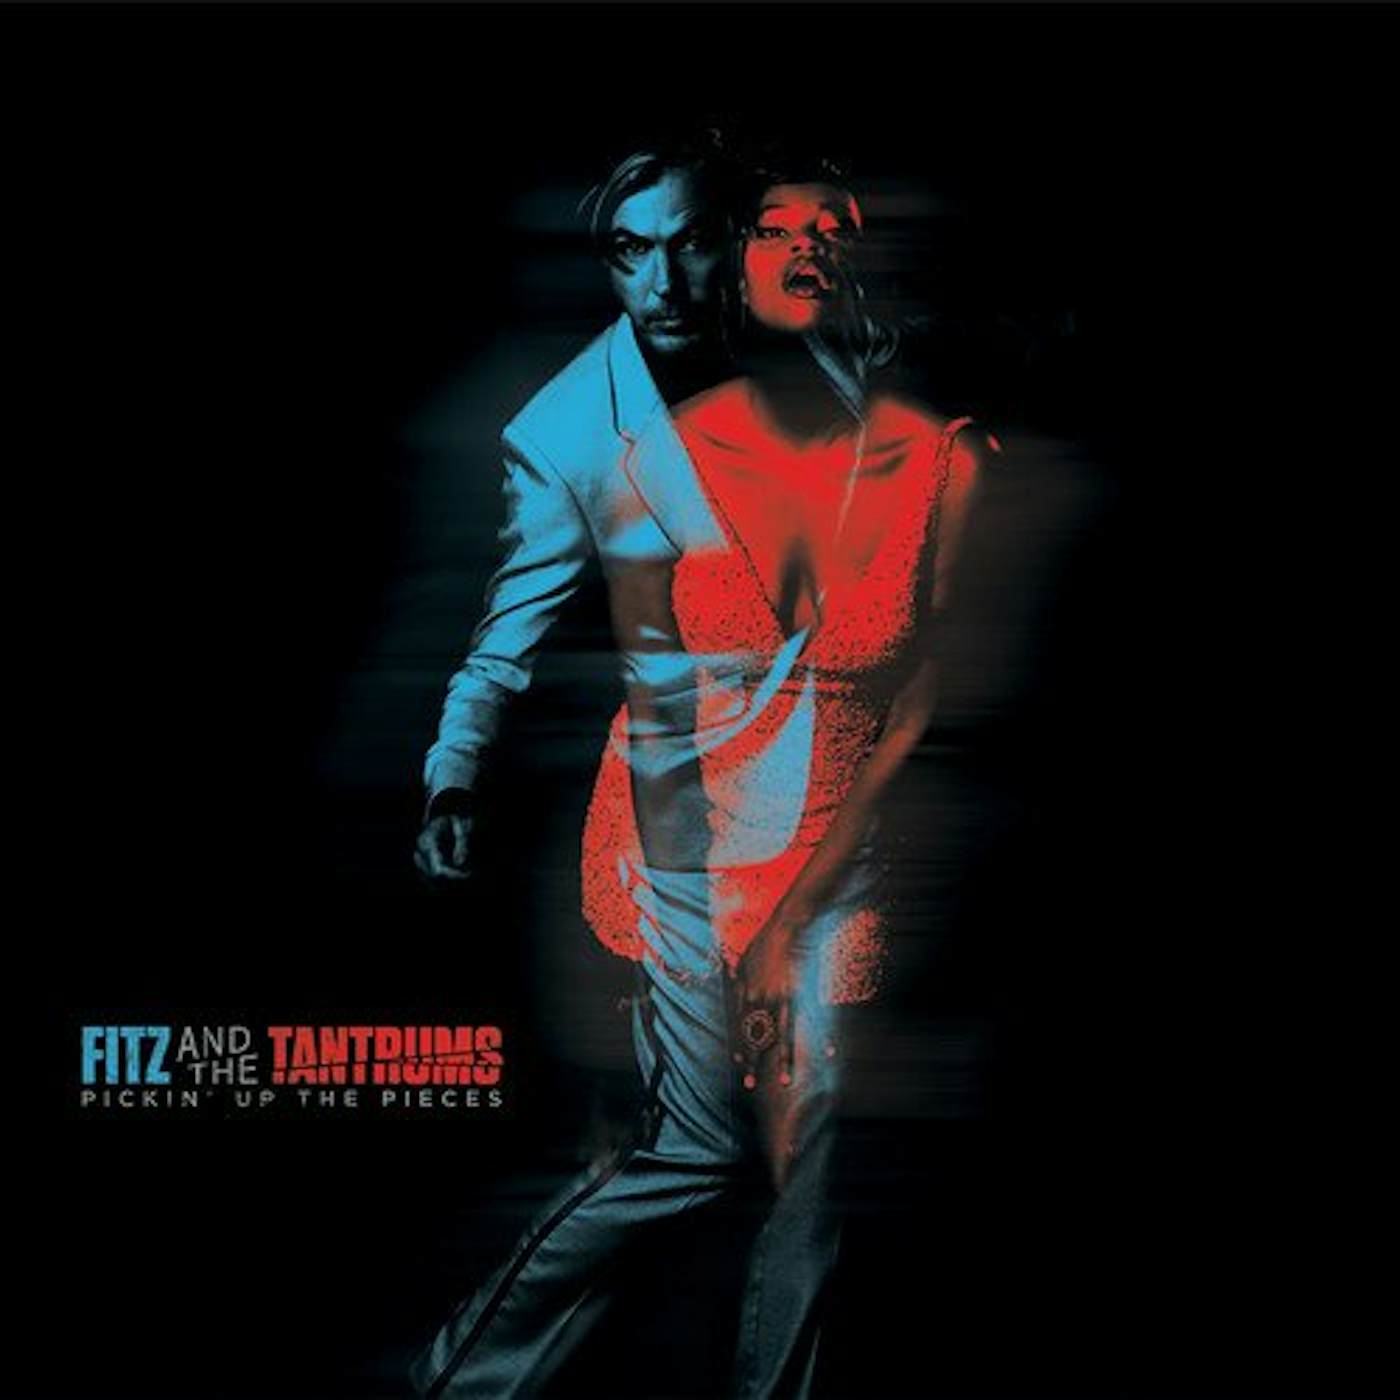 Fitz and The Tantrums PICKIN UP THE PIECES Vinyl Record